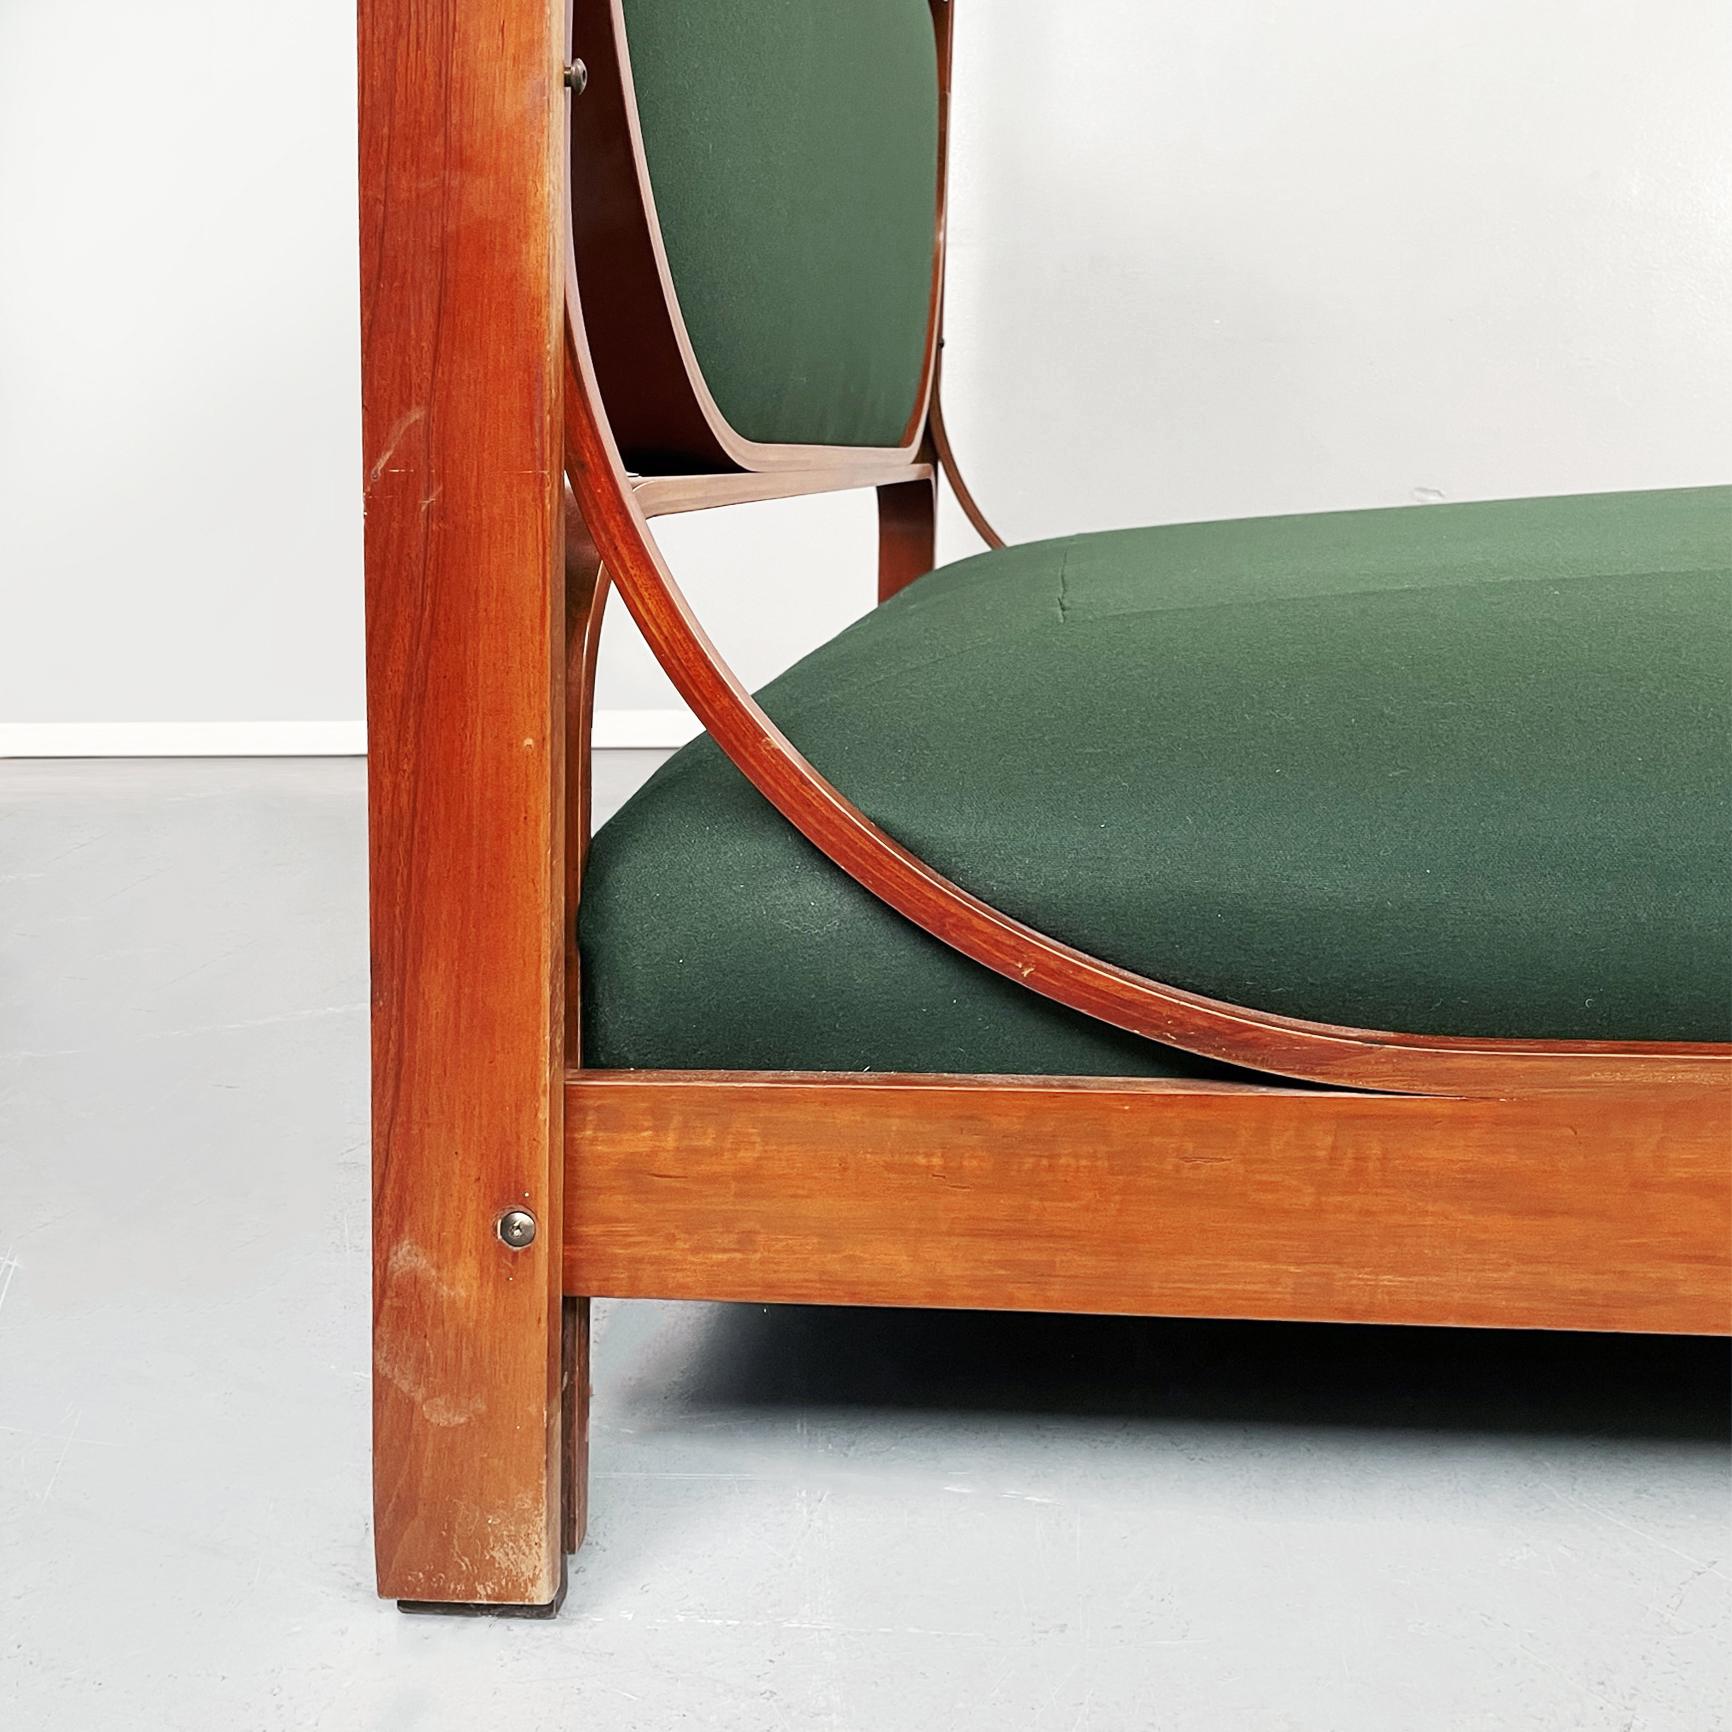 Italian midcentury Wooden and green fabric double bed L12 by Fulvio Raboni, 1959 For Sale 9